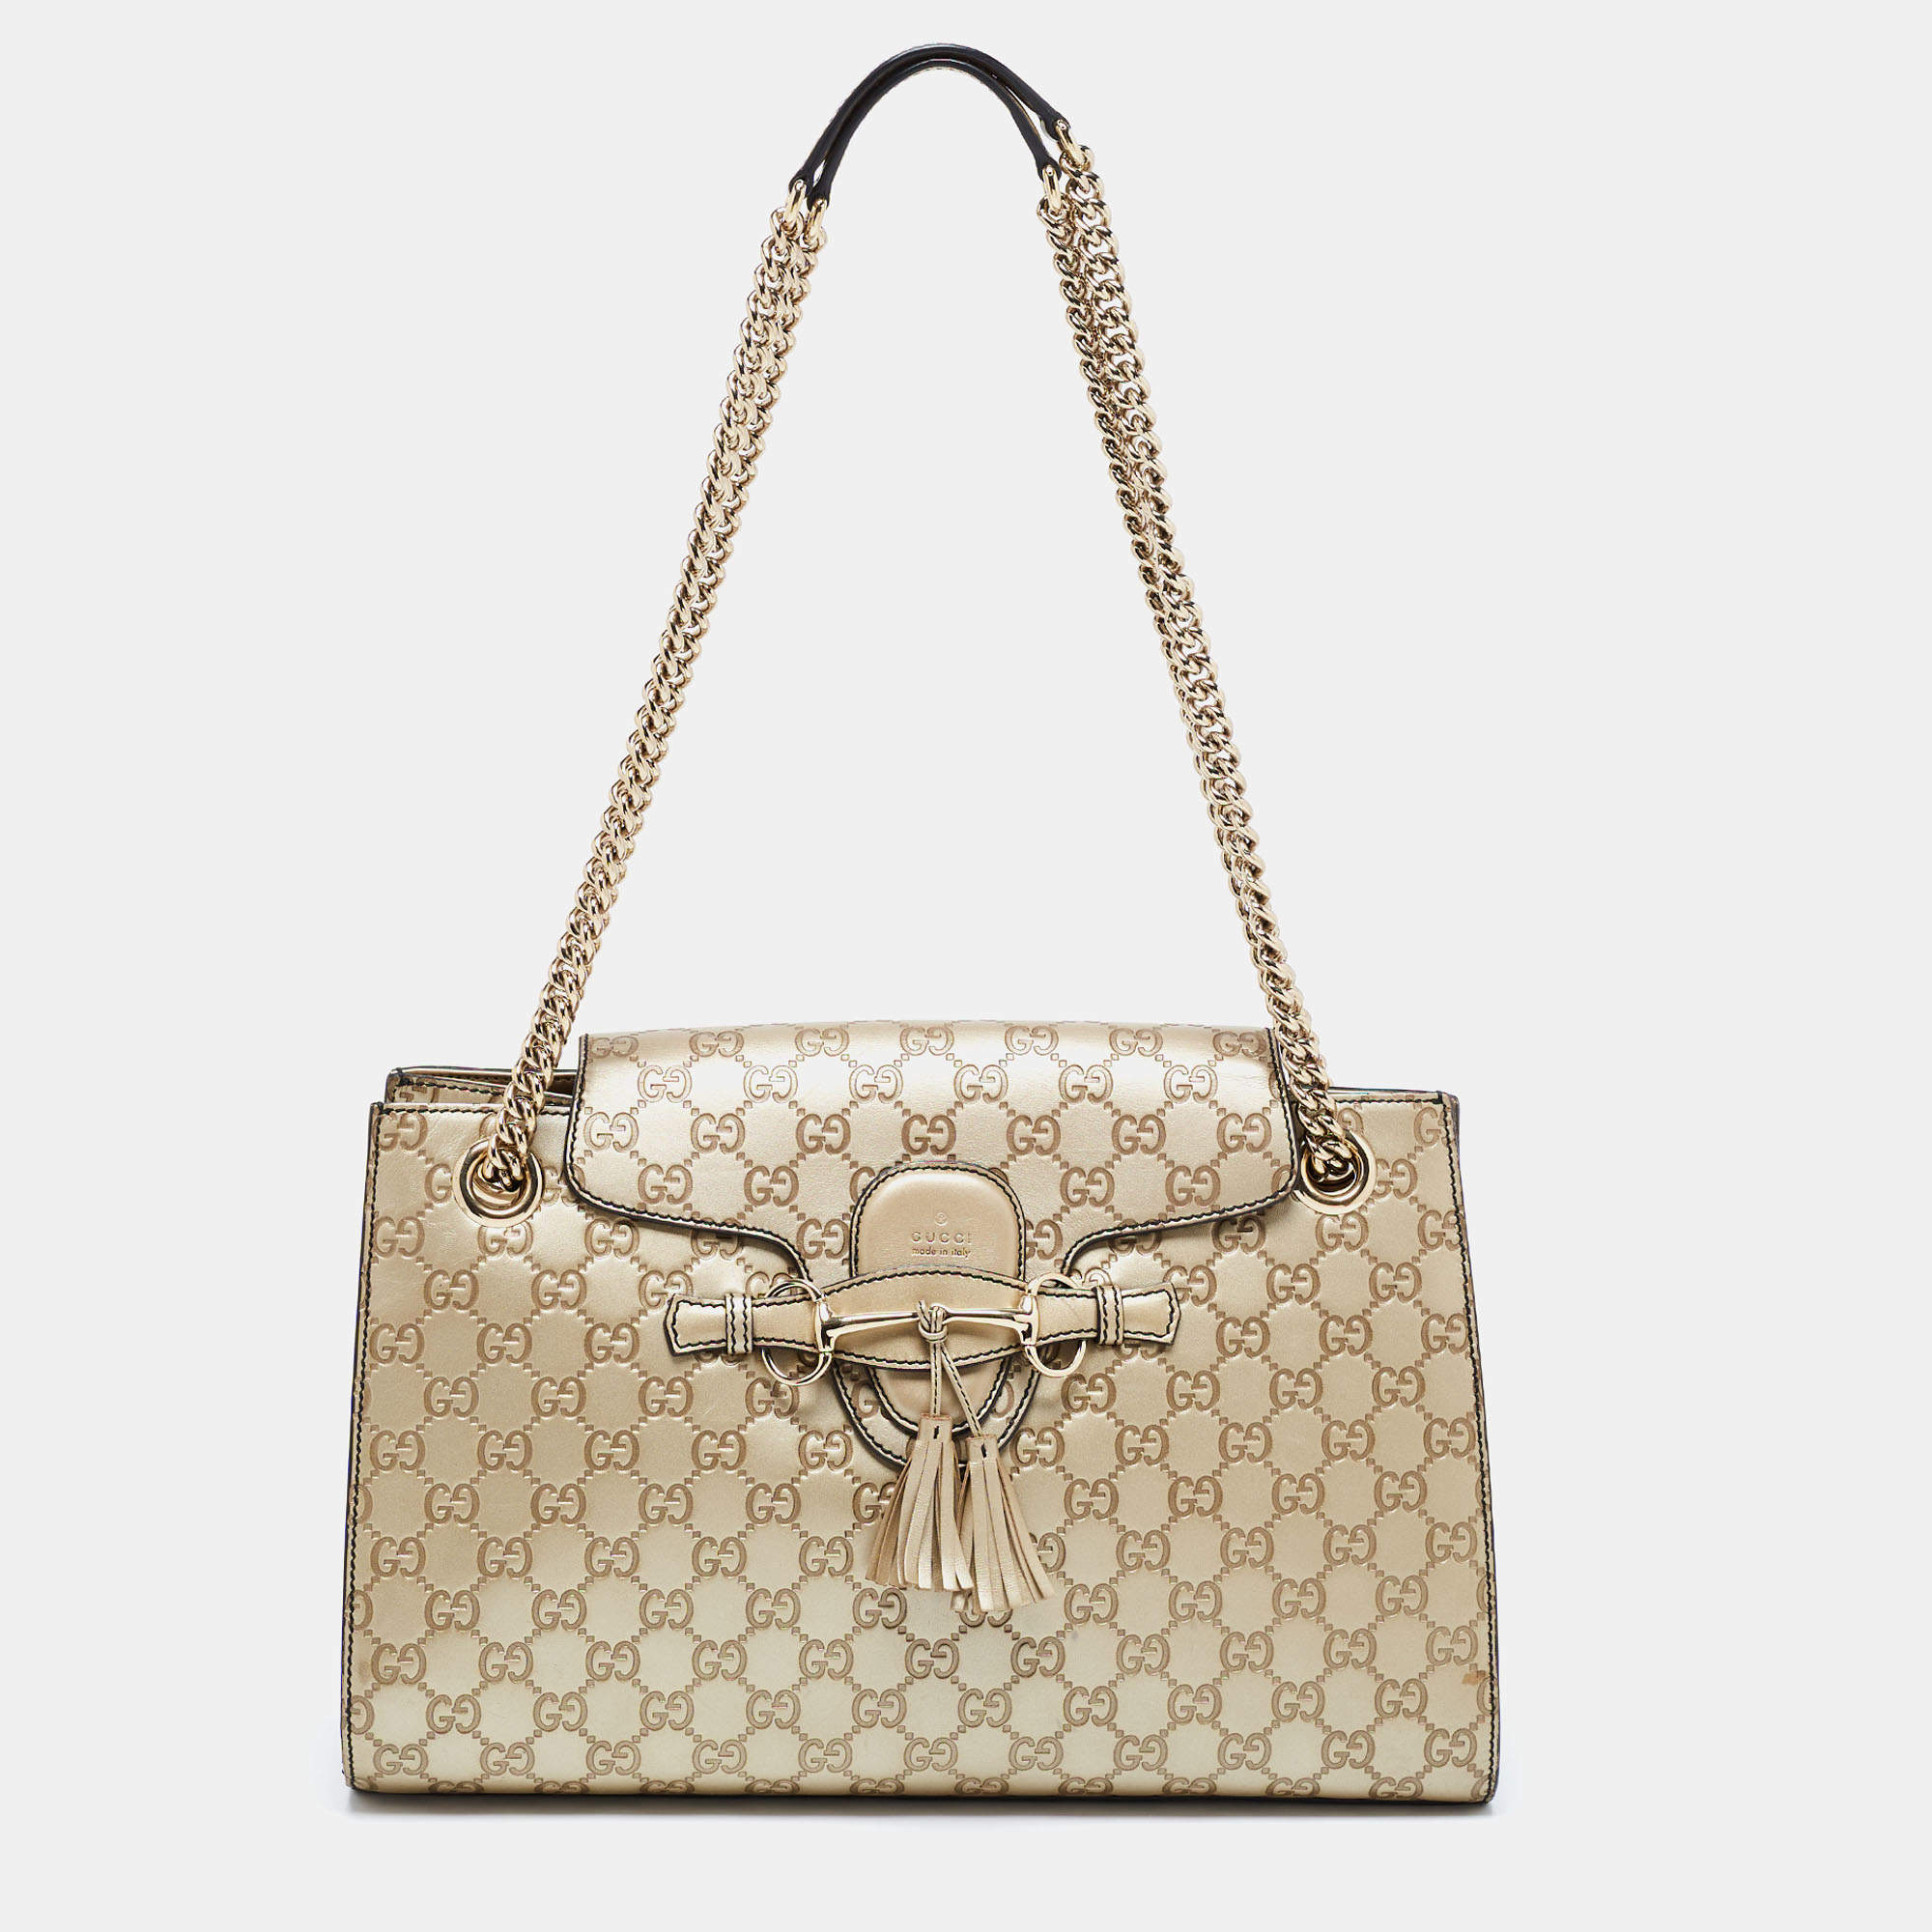 Gucci Metallic Beige Guccissima Leather Large Emily Chain Shoulder Bag ...